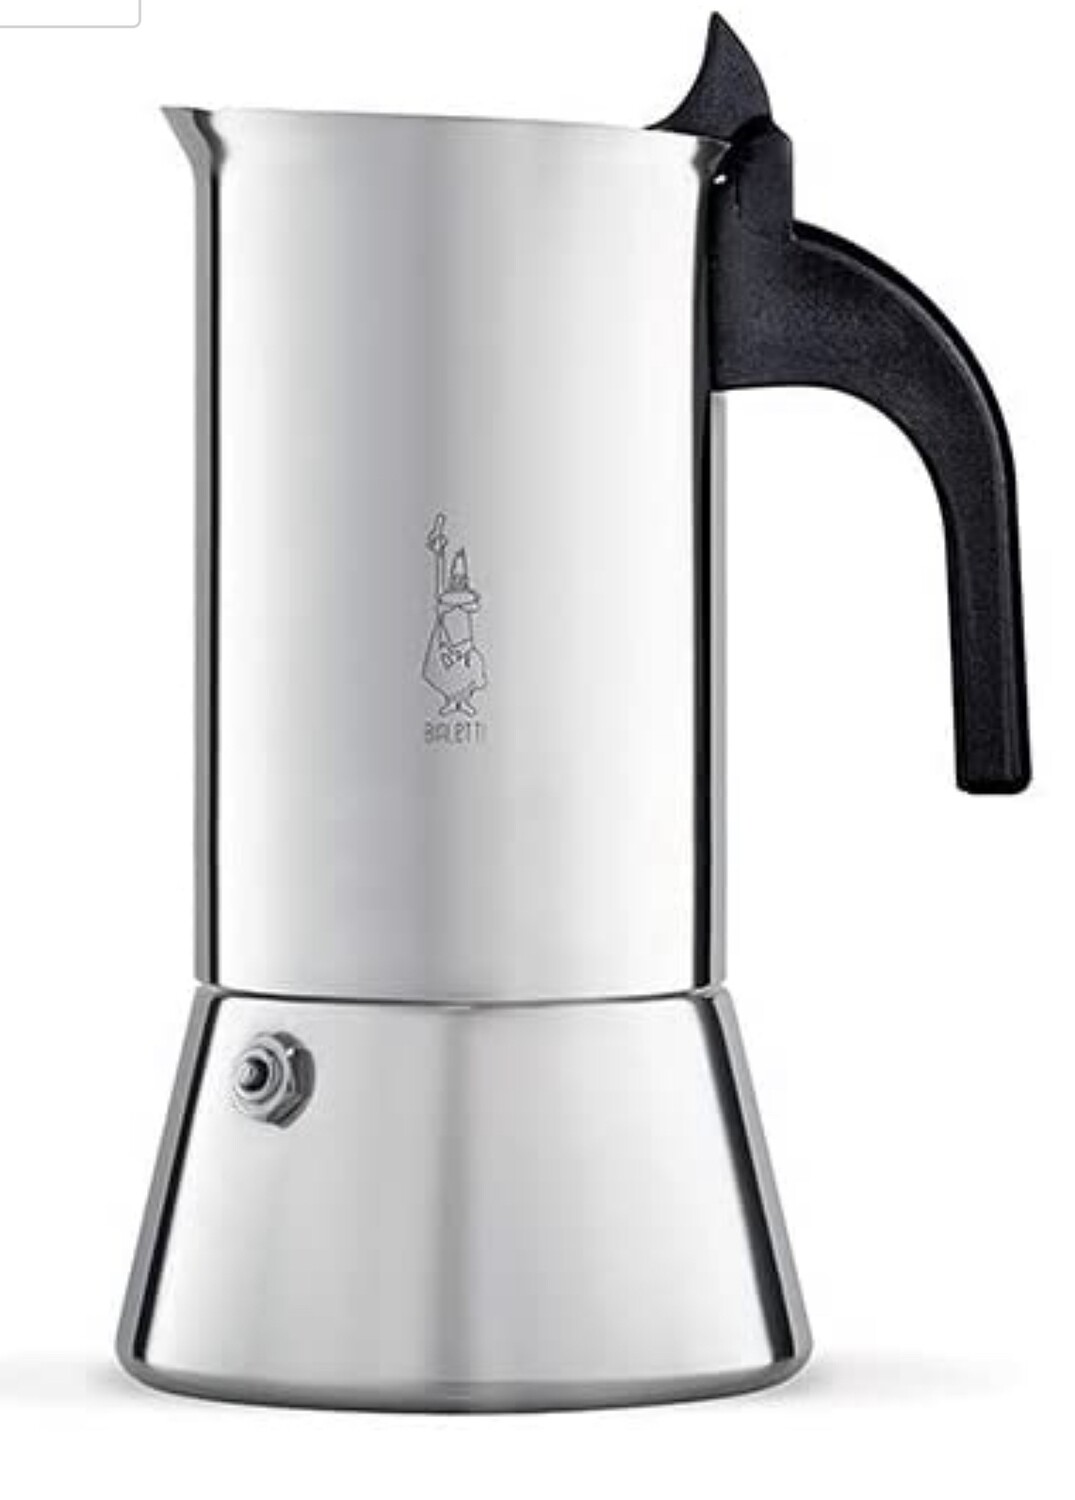 BIALETTI - Venus Stainless Steel Induction Espresso Maker 10 Cup